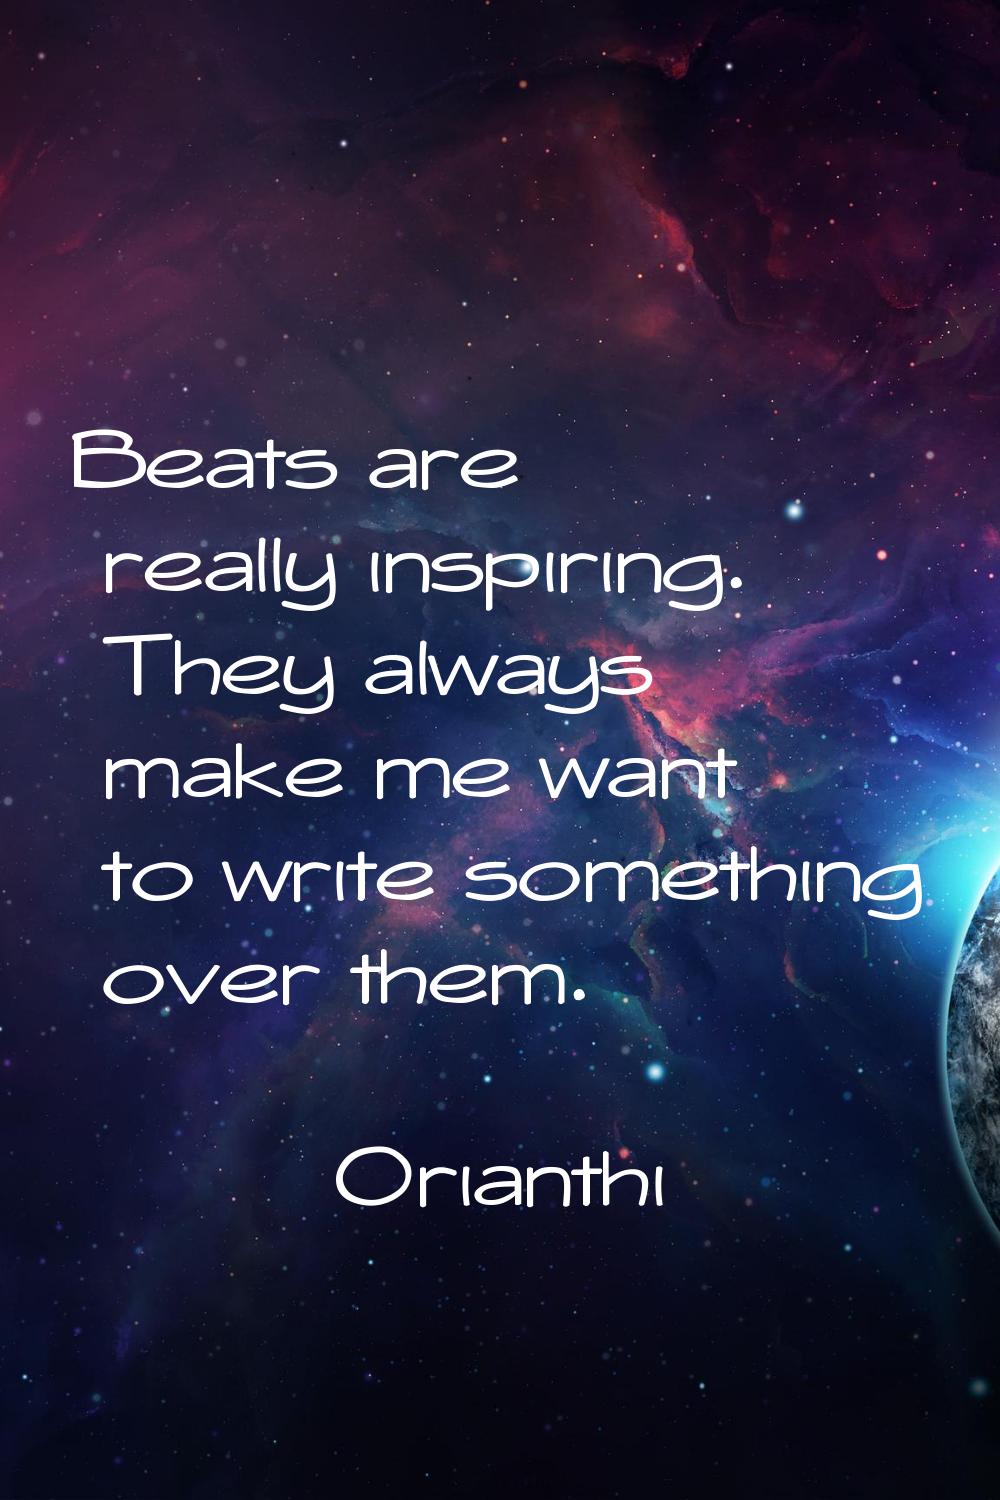 Beats are really inspiring. They always make me want to write something over them.